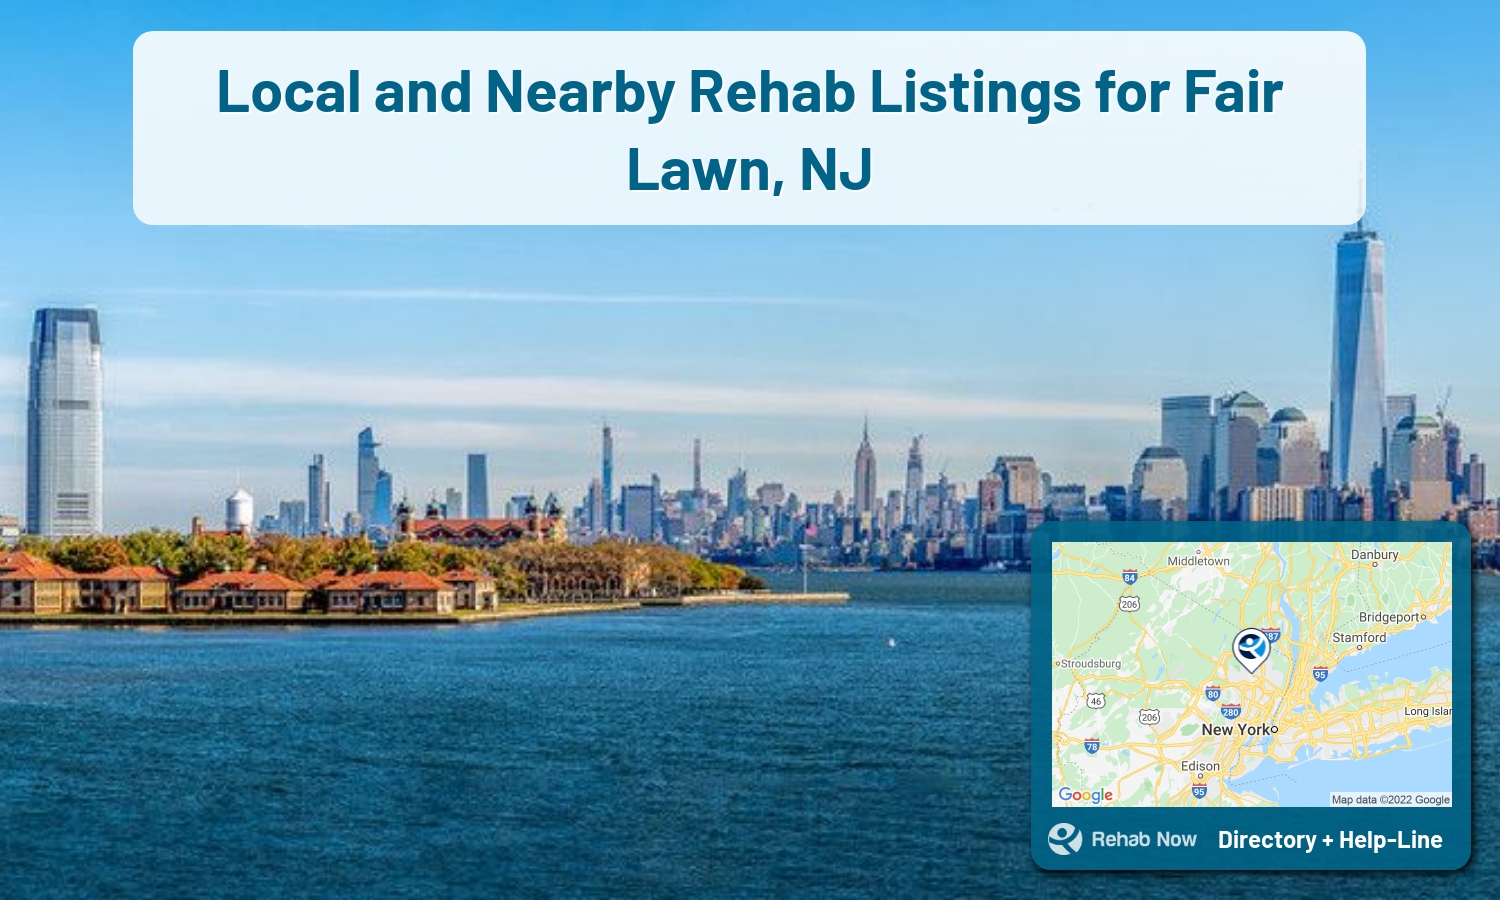 Fair Lawn, NJ Treatment Centers. Find drug rehab in Fair Lawn, New Jersey, or detox and treatment programs. Get the right help now!